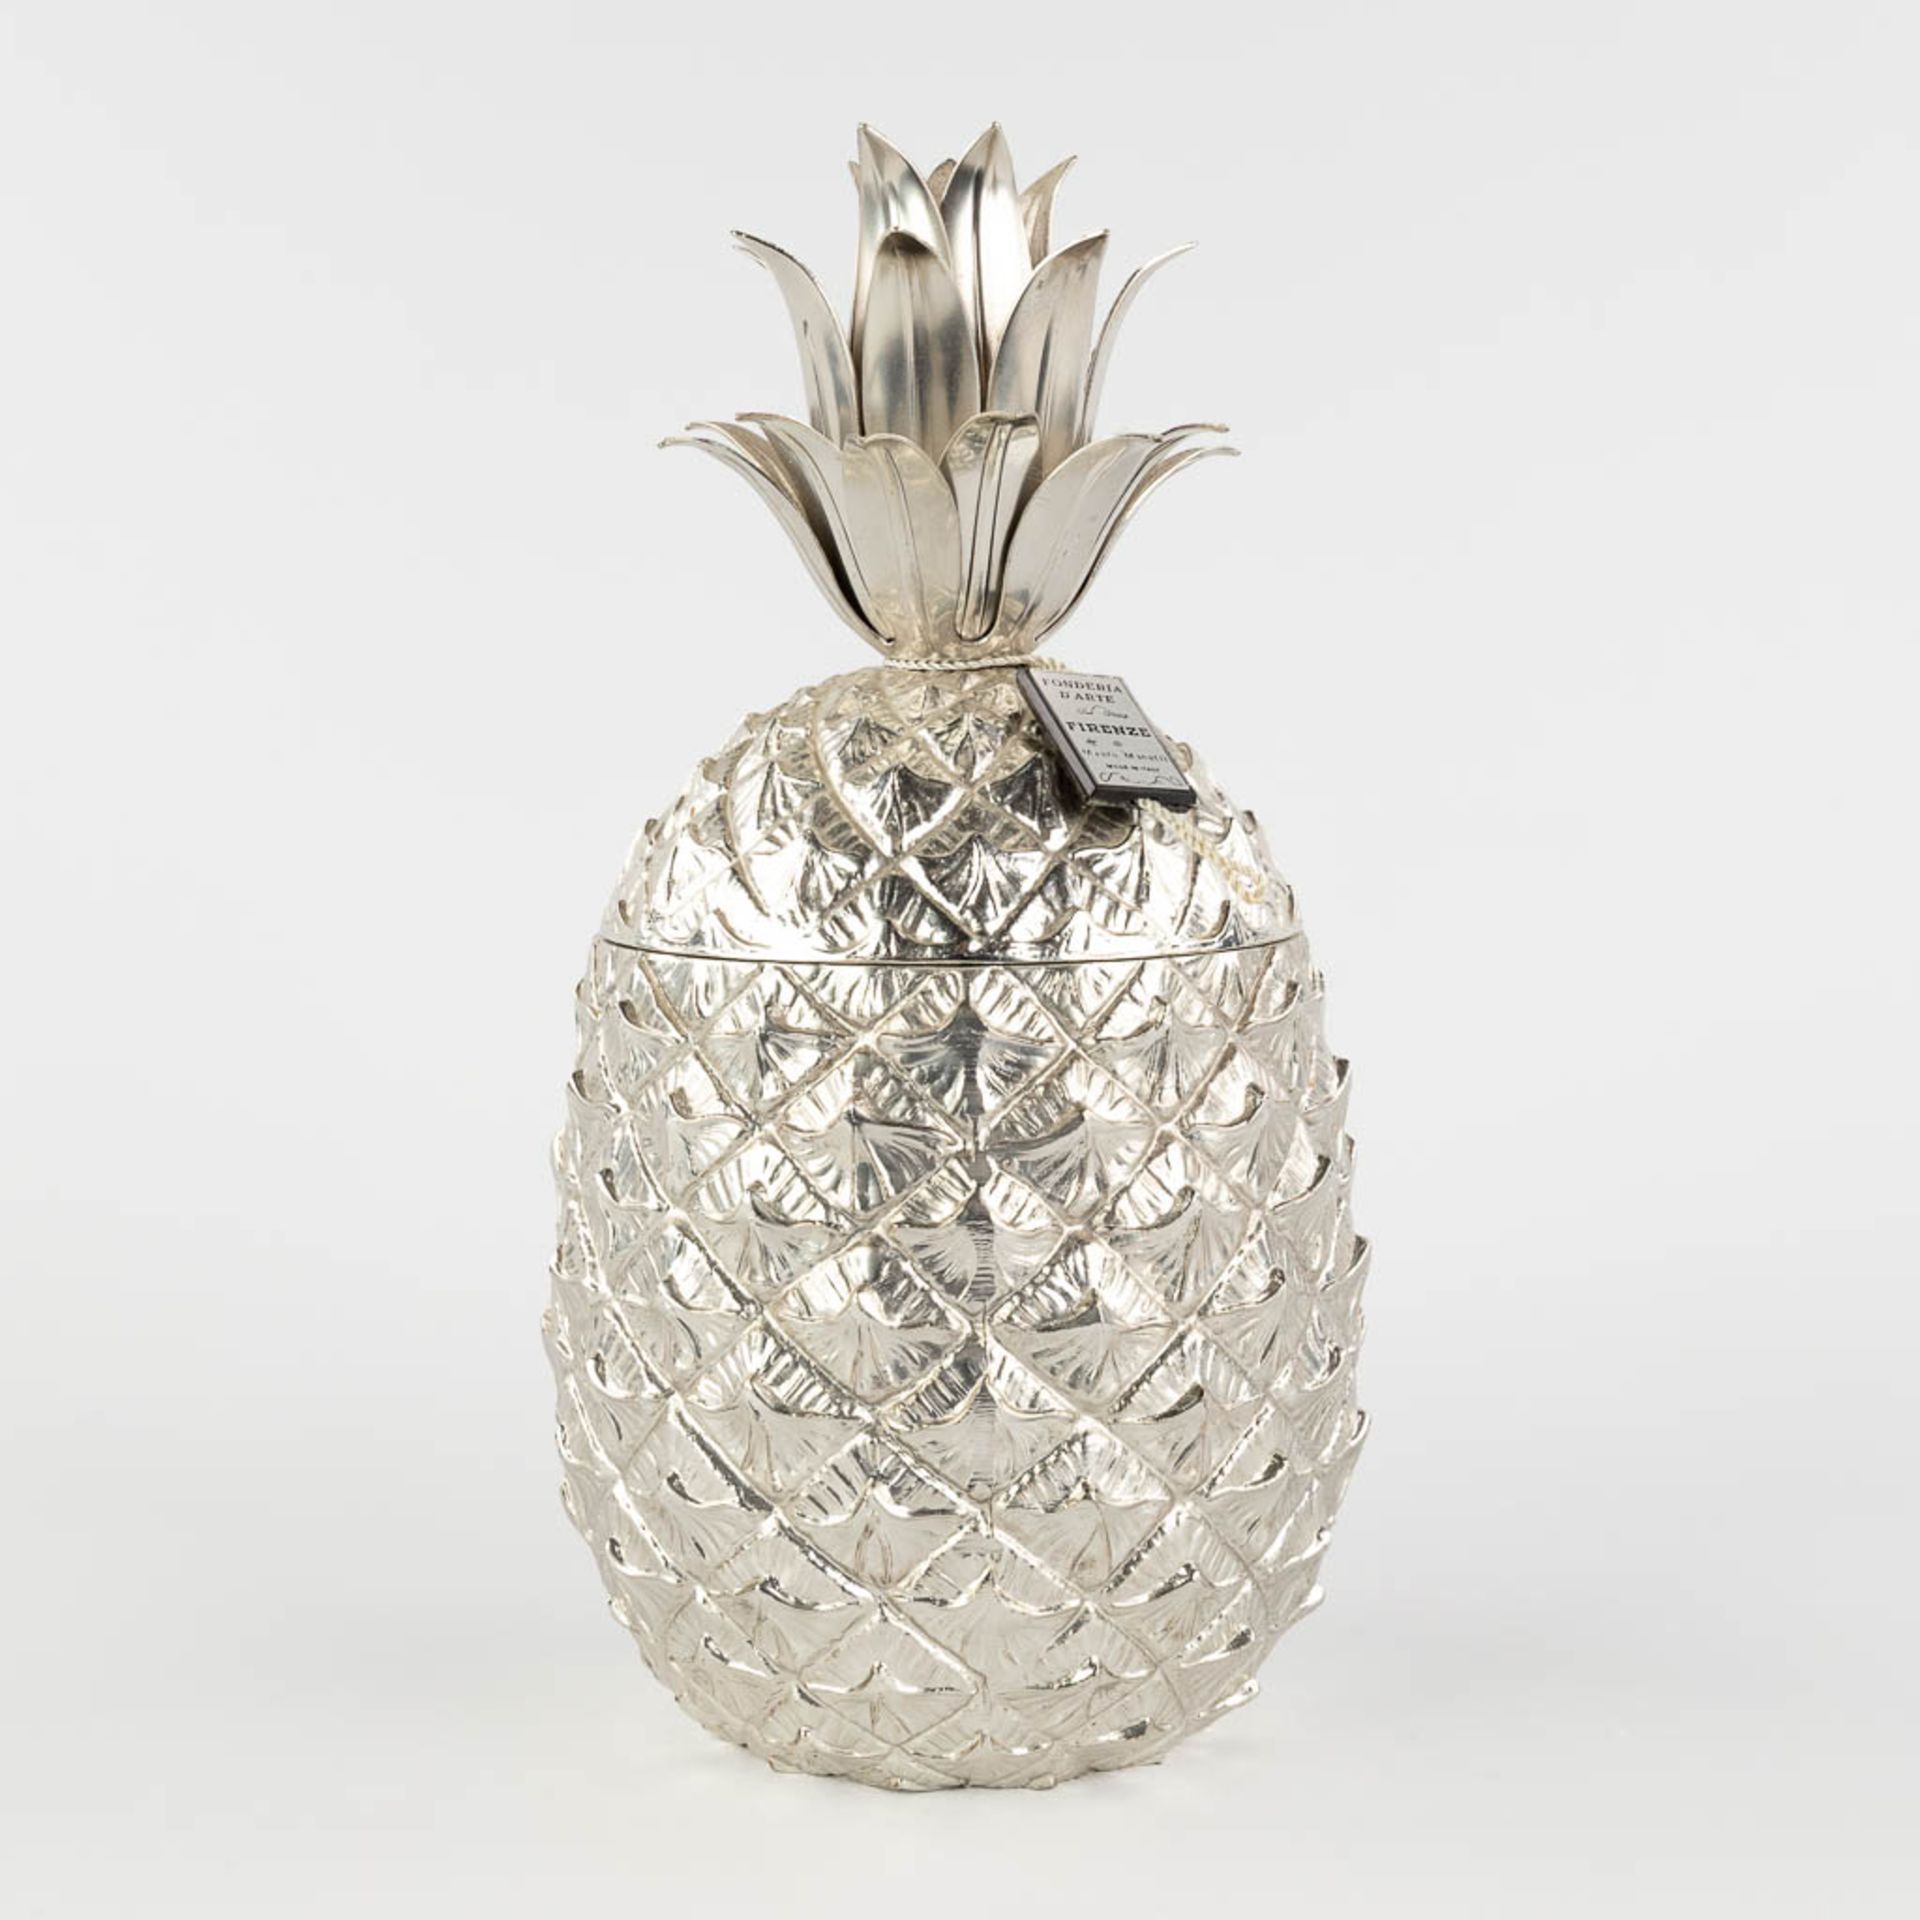 Mauro MANETTI (XX) 'Pineapple' an ice pail. (H:26 x D:14 cm) - Image 3 of 13